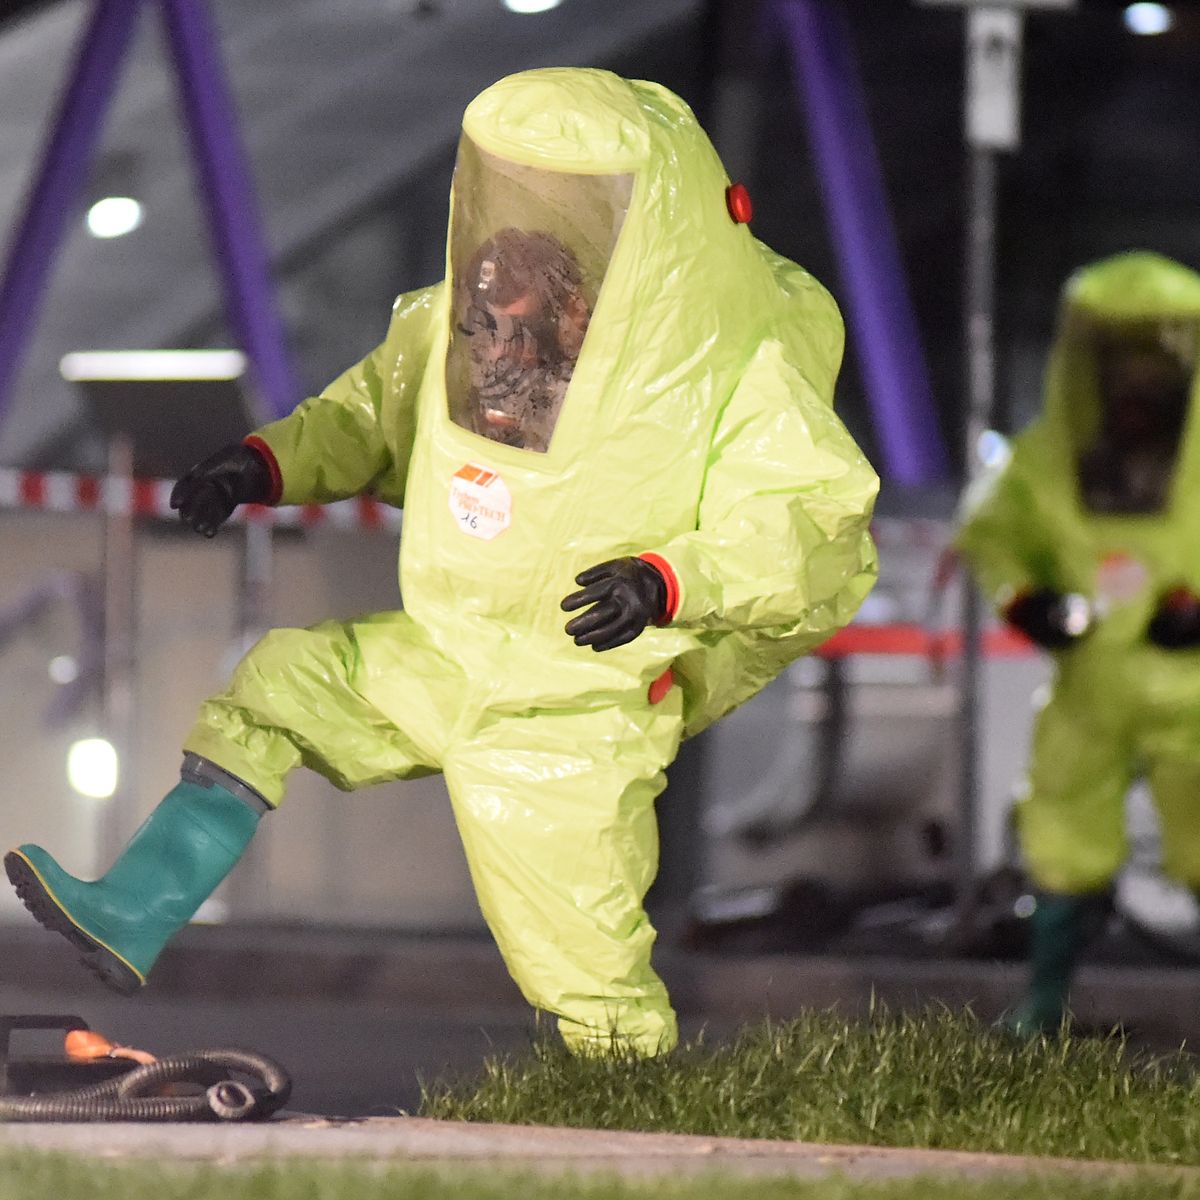 https://hips.hearstapps.com/hmg-prod/images/firefighter-wearing-a-hazmat-suit-takes-part-in-the-news-photo-1575580700.jpg?crop=0.718xw:1xh;center,top&resize=1200:*